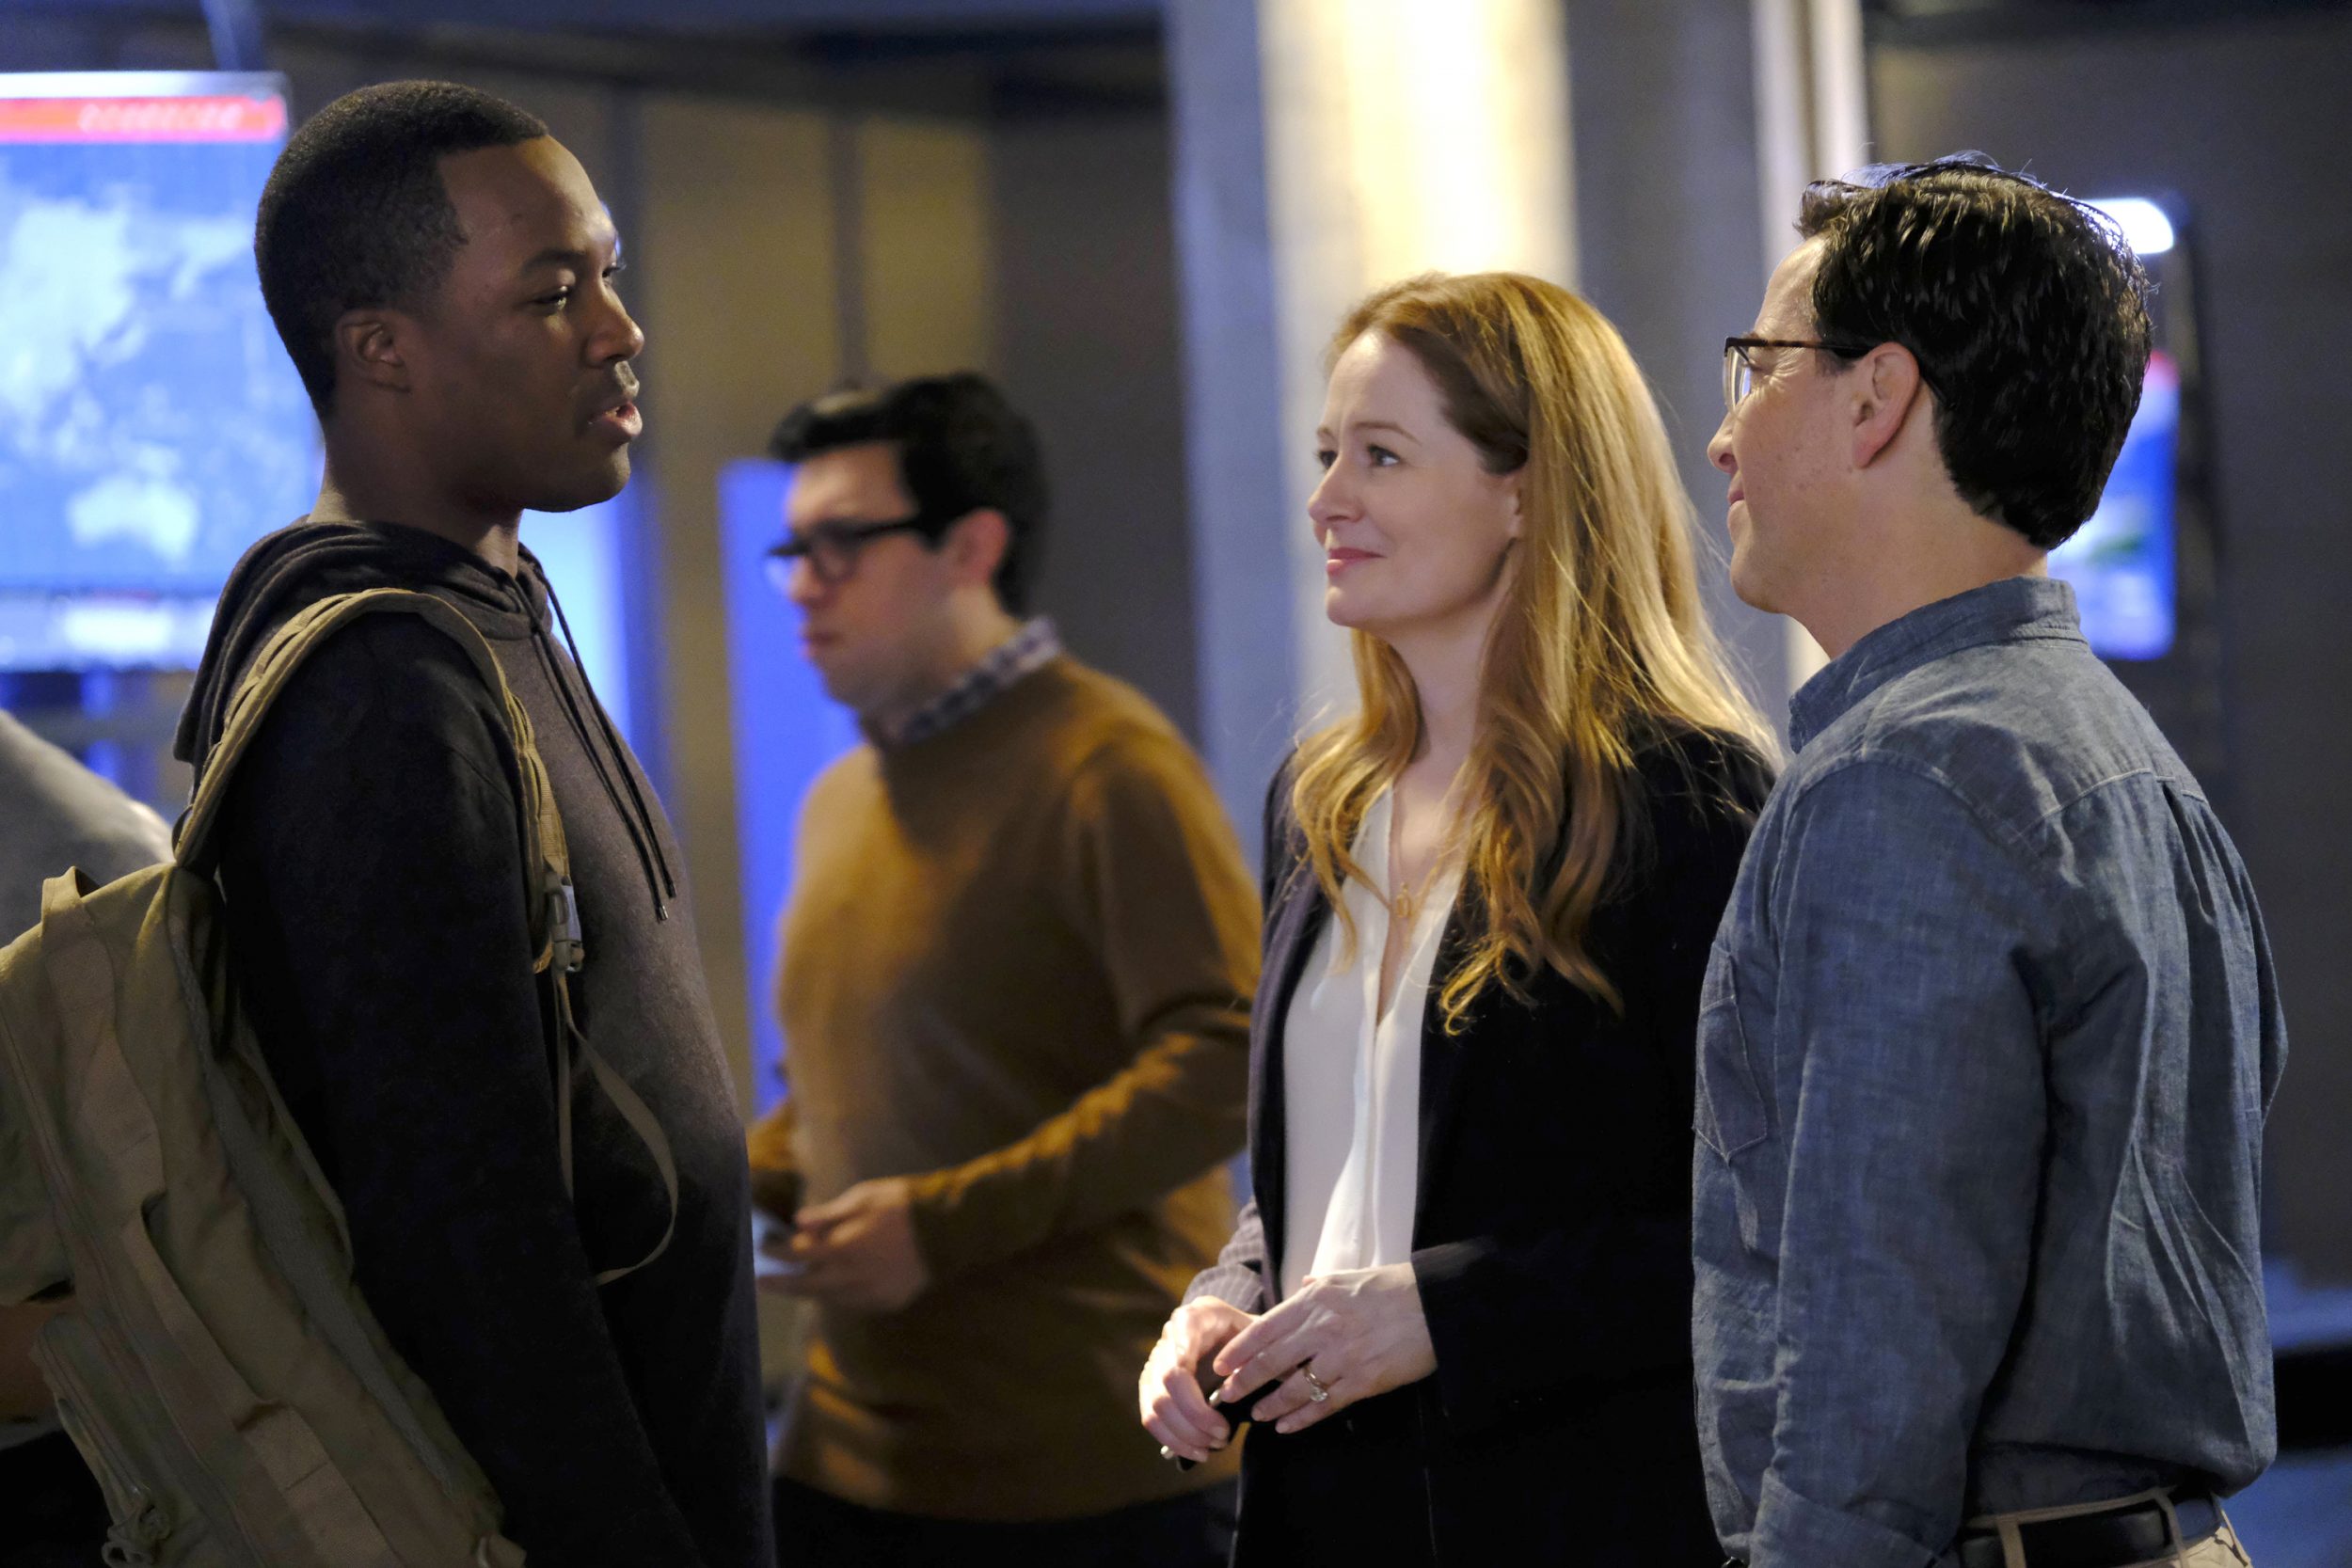 24: LEGACY: L-R: Corey Hawkins, Miranda Otto and Dan Bucatinsky in the “3:00 PM-4:00 PM” episode of 24: LEGACY airing Monday, Feb. 20 (8:00-9:01 PM ET/PT) on FOX. ©2017 Fox Broadcasting Co. Cr: Guy D'Alema/FOX